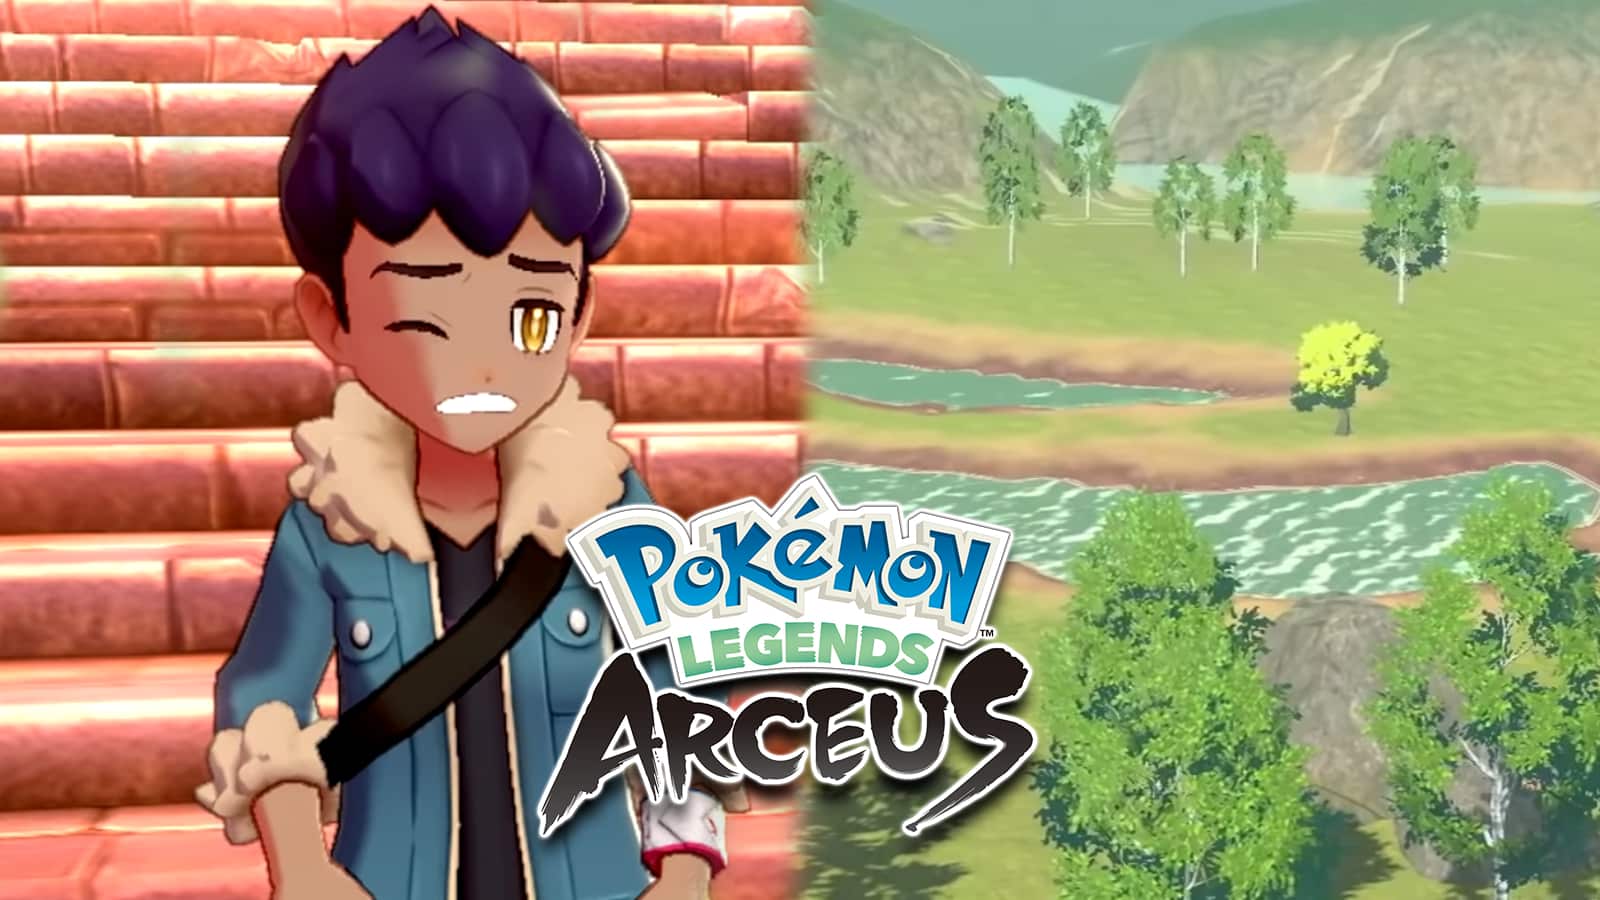 Pokemon Legends: Arceus Release Date, Trailer, Gameplay, and more